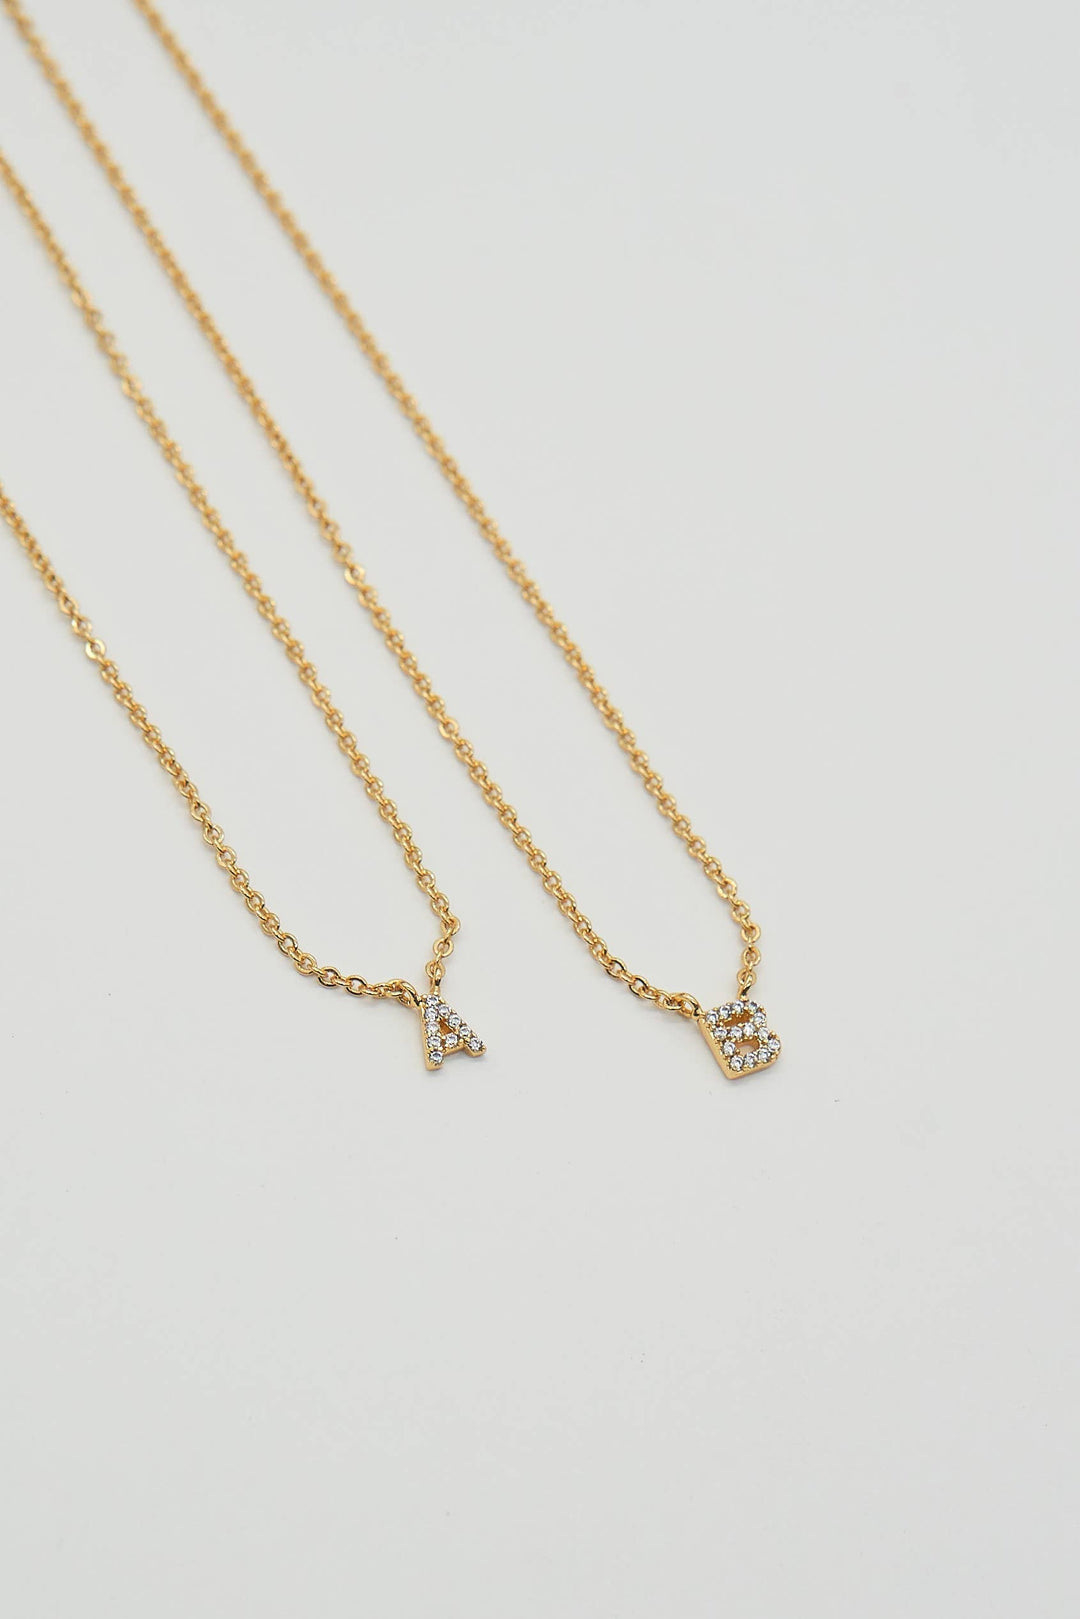 Shiny Initial Necklace: Holiday Favorite!: A